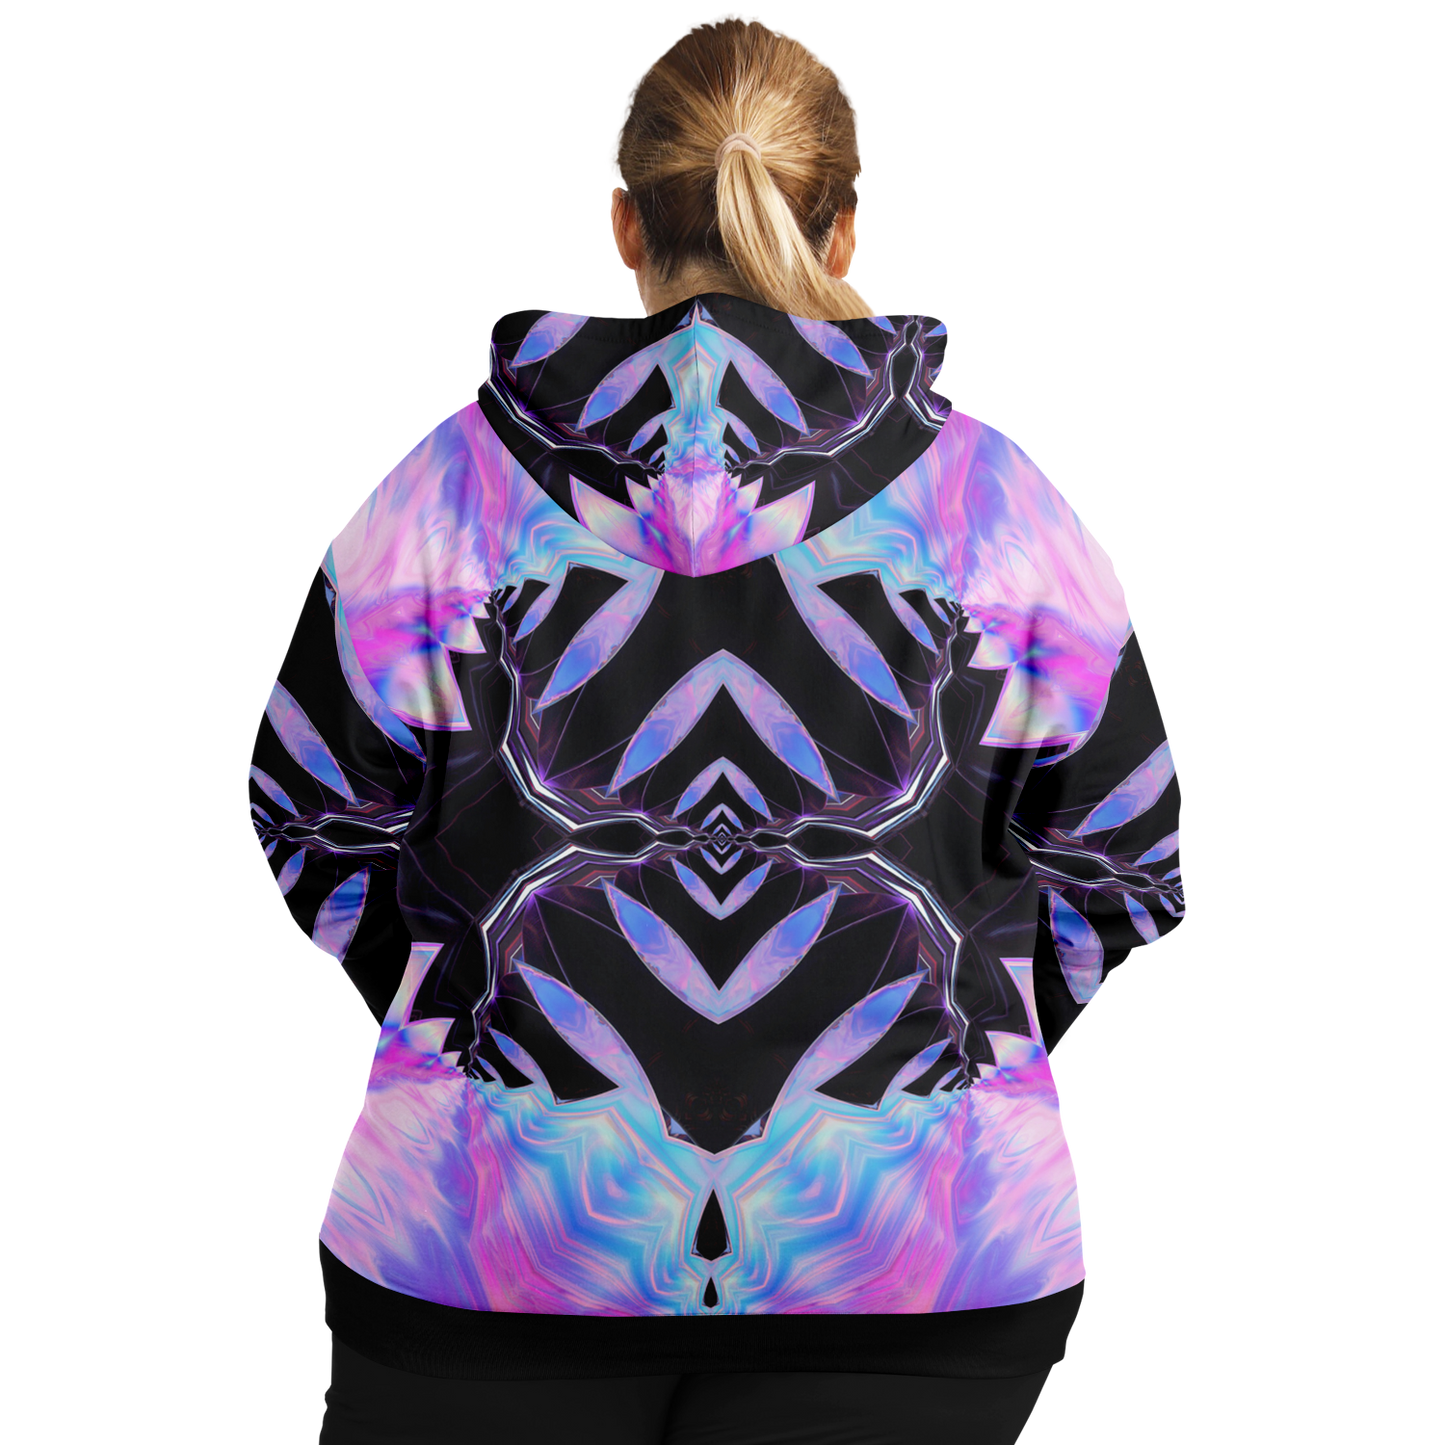 Starburst Zip Up Hoodie, Thicc King and Queen Size